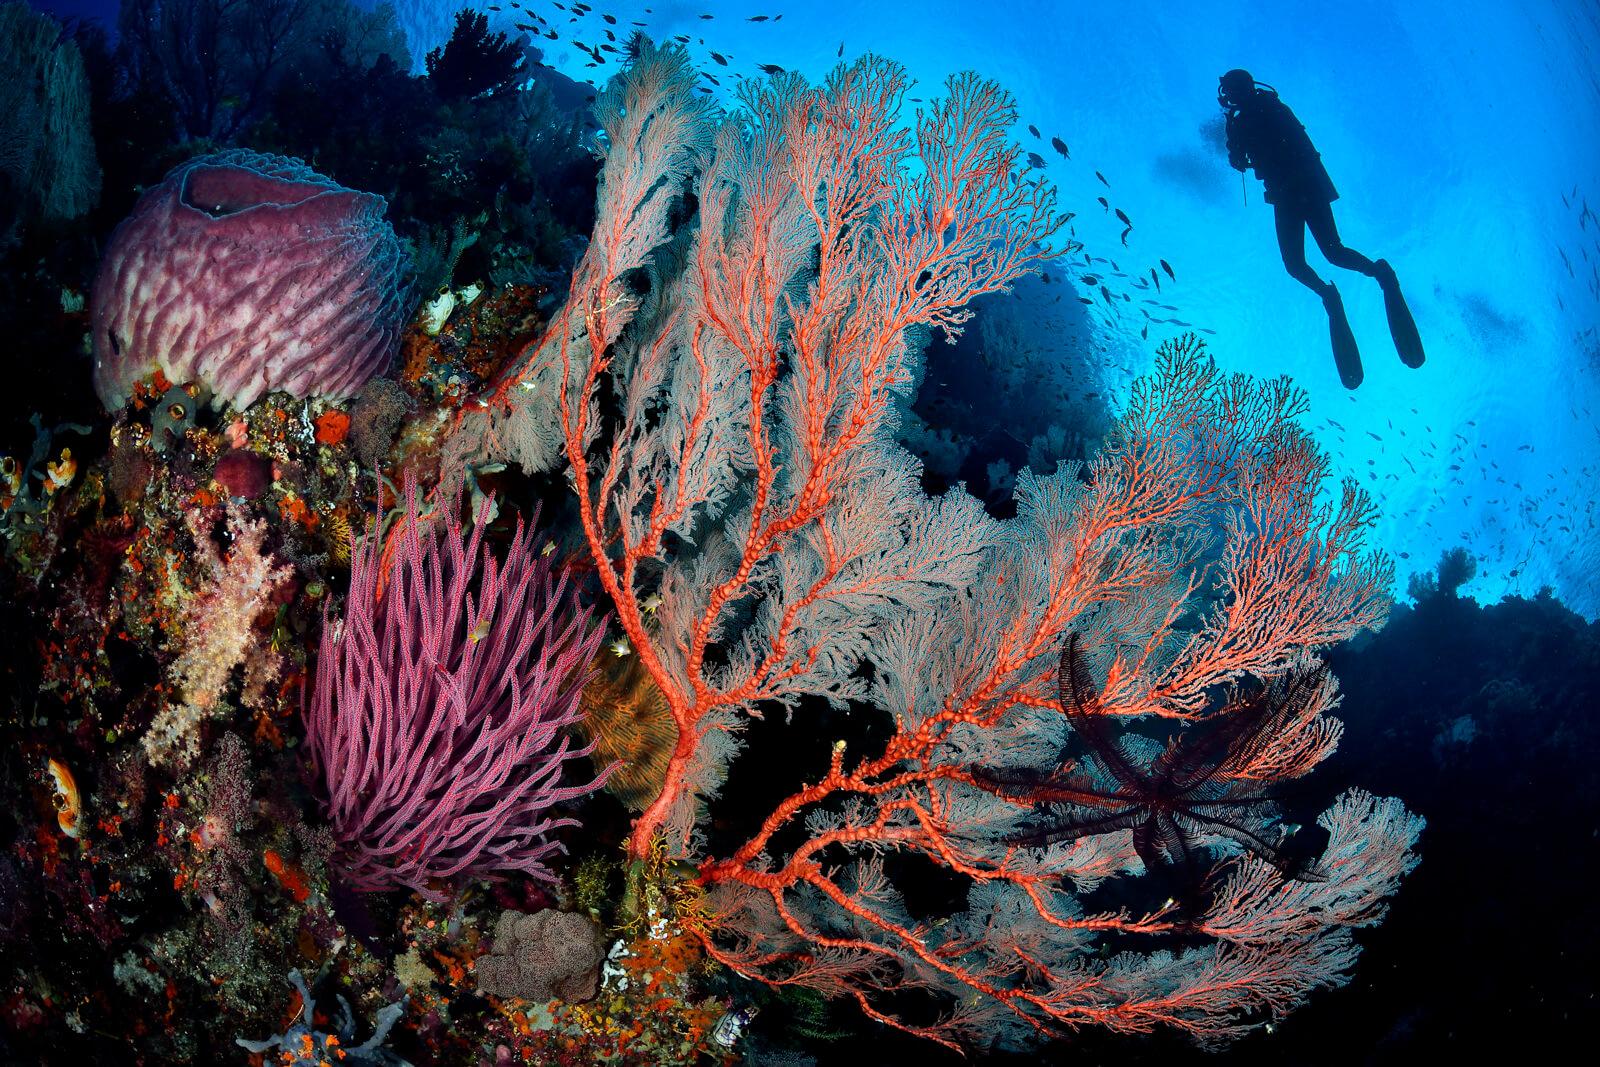 Sea fan and diver by Damien Mauric